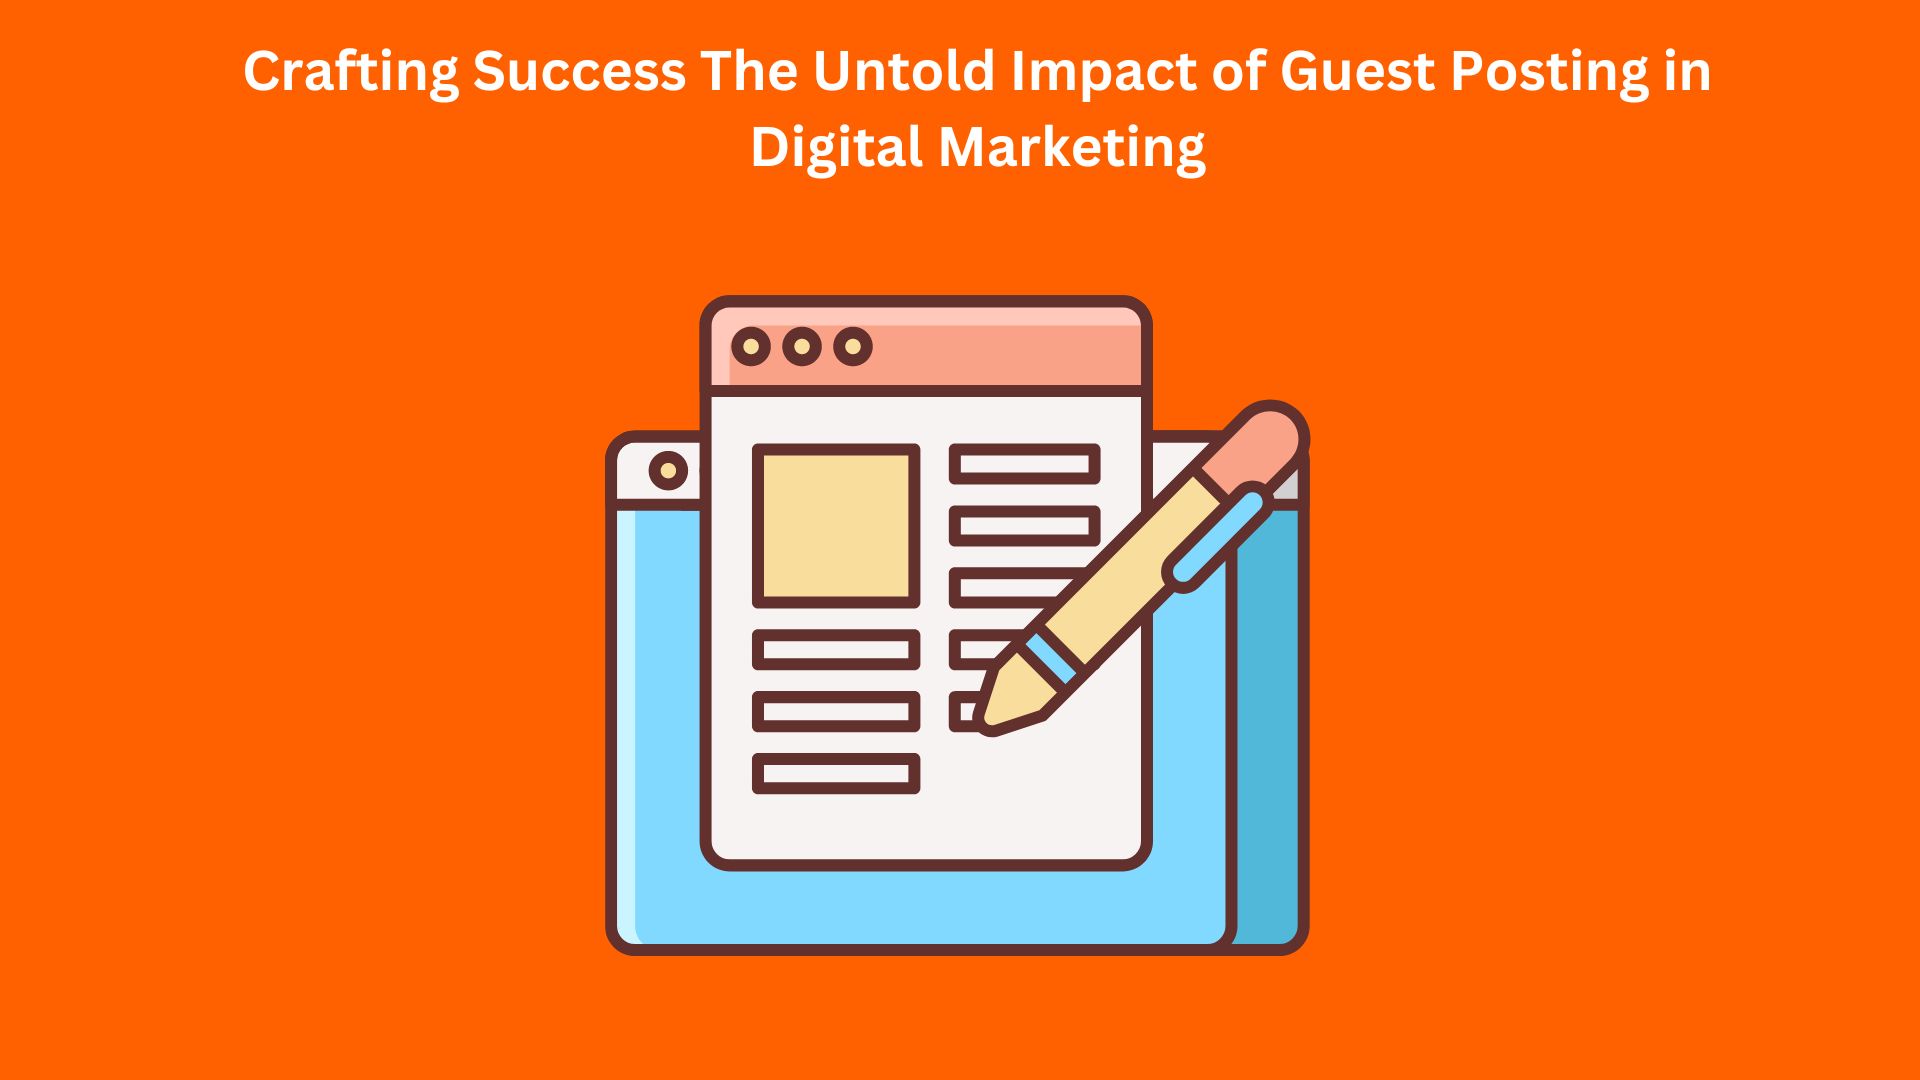 Crafting Success The Untold Impact of Guest Posting in Digital Marketing